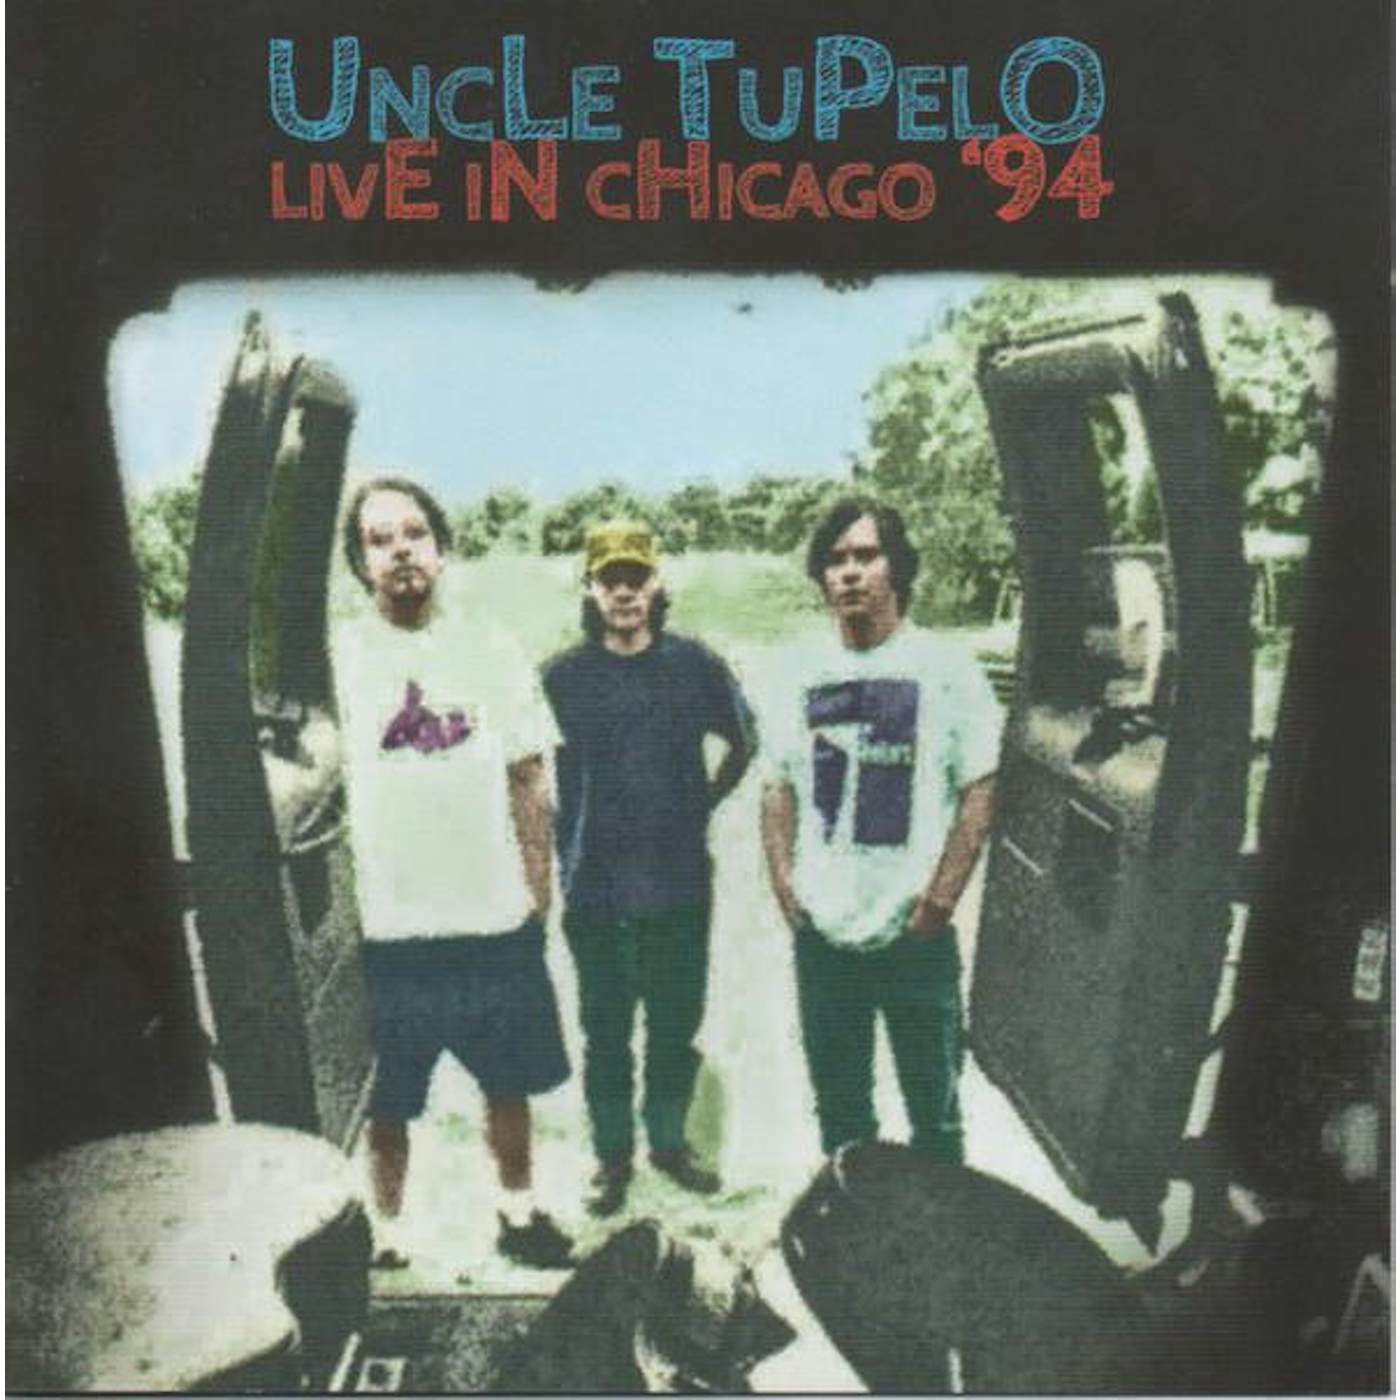 Uncle Tupelo LIVE IN CHICAGO '94 CD